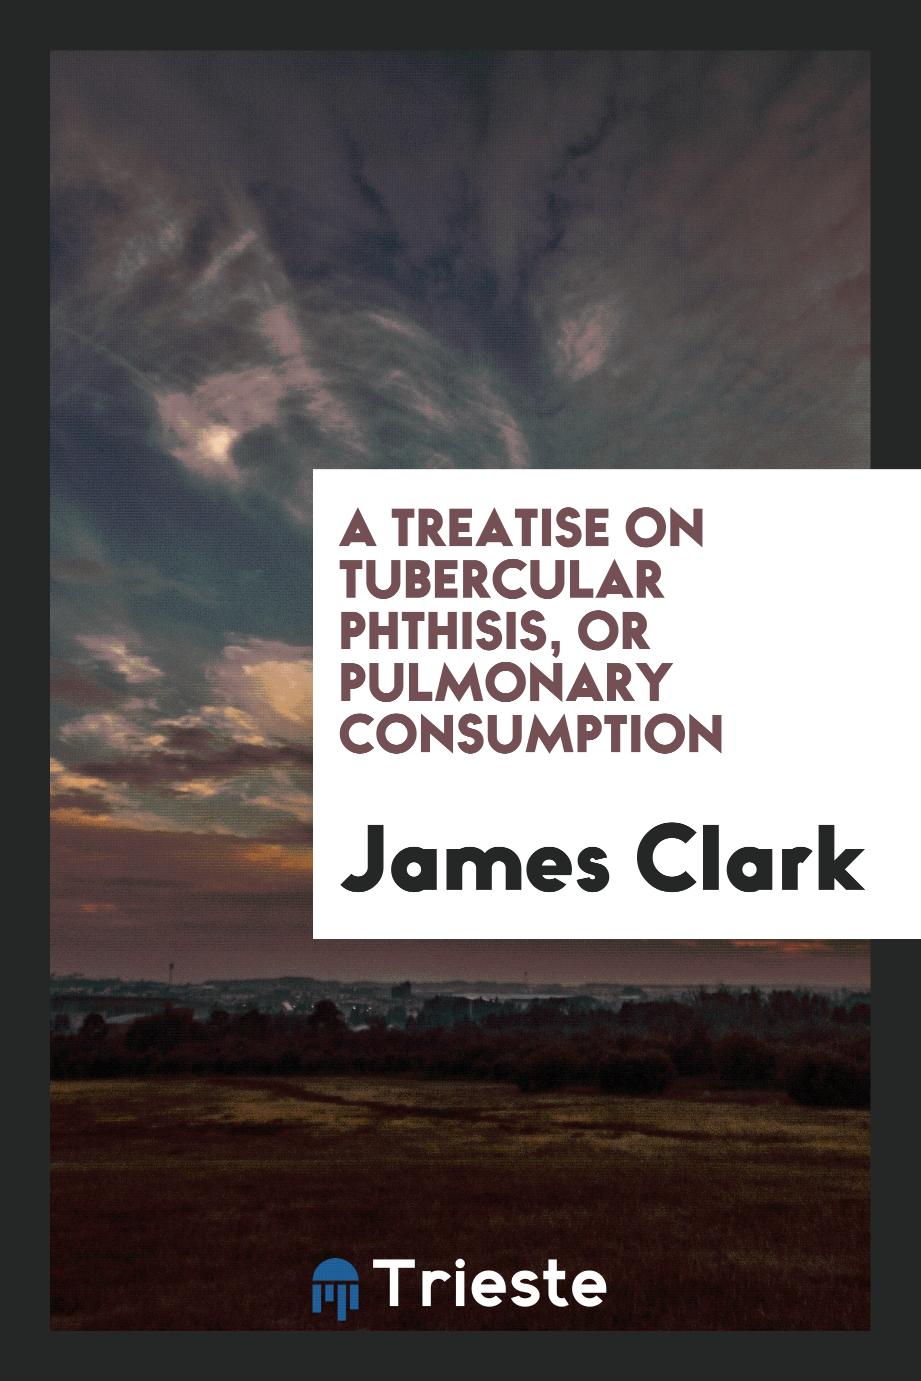 A Treatise on Tubercular Phthisis, Or Pulmonary Consumption